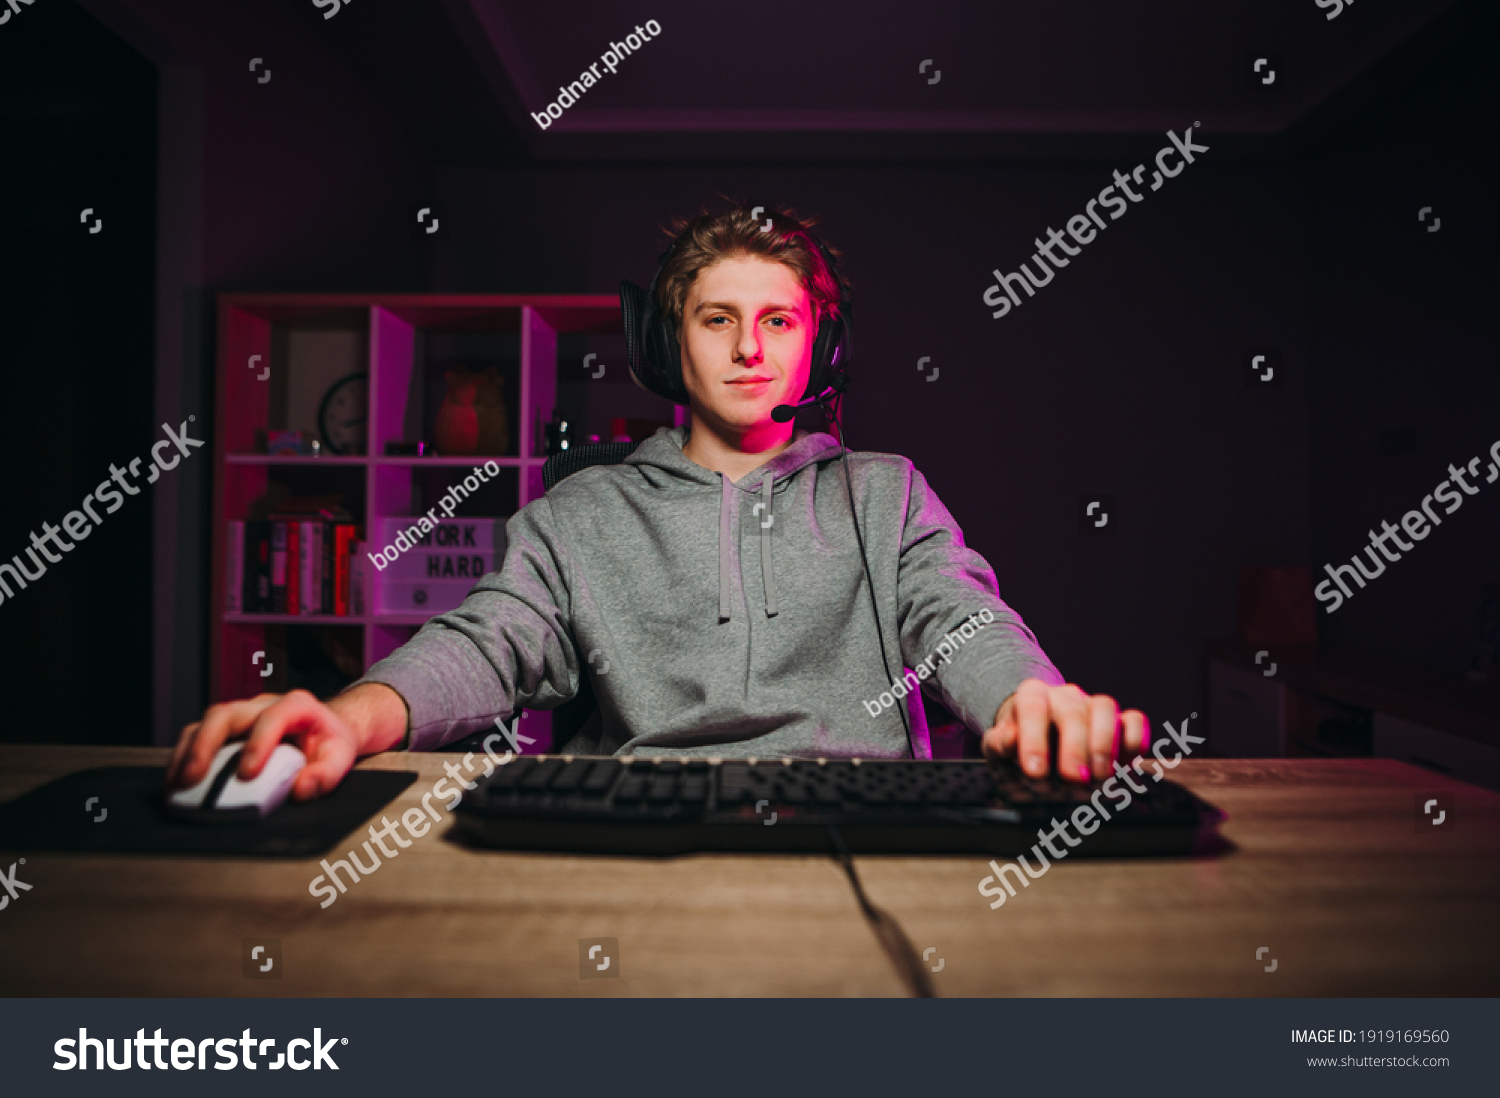 Handsome young man in casual clothes and headset sitting at a table in a room with purple lights and playing video games on the computer with a smile on his face looking at the screen. #1919169560